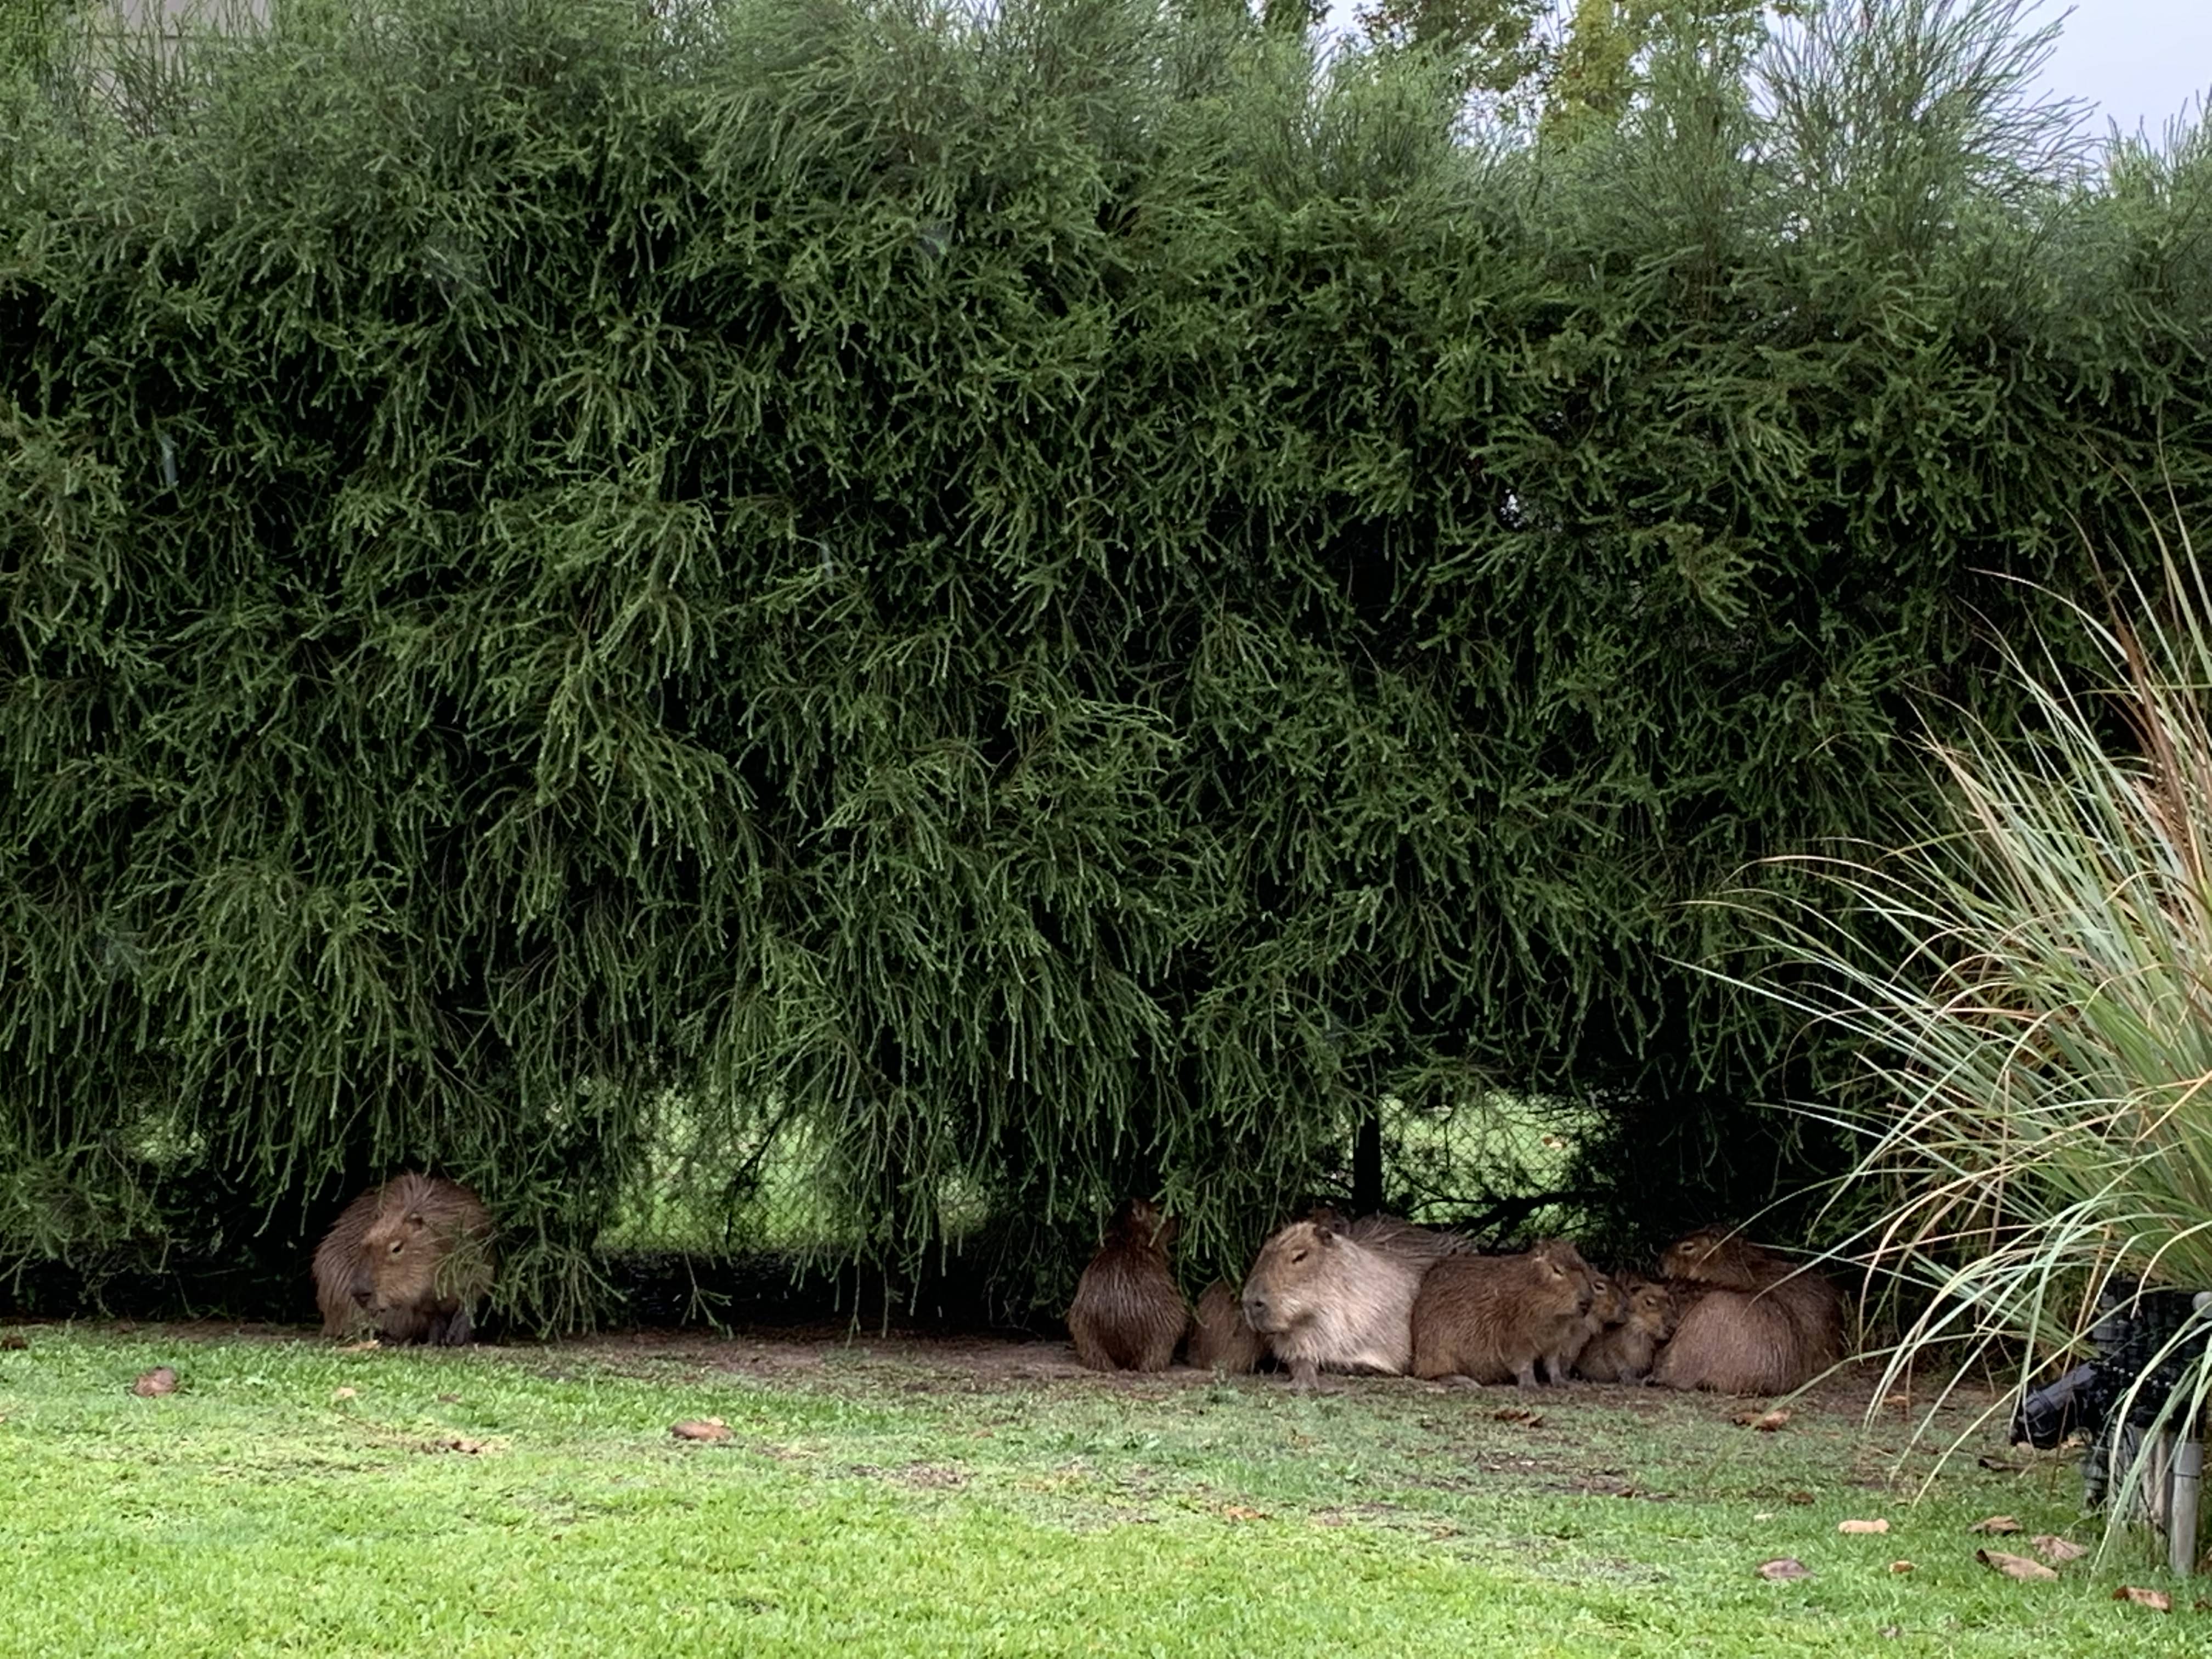 A family of capybaras shelter under some hedges in Nordelta, greater Buenos Aires, on March 17, 2022. (Ciara Nugent)